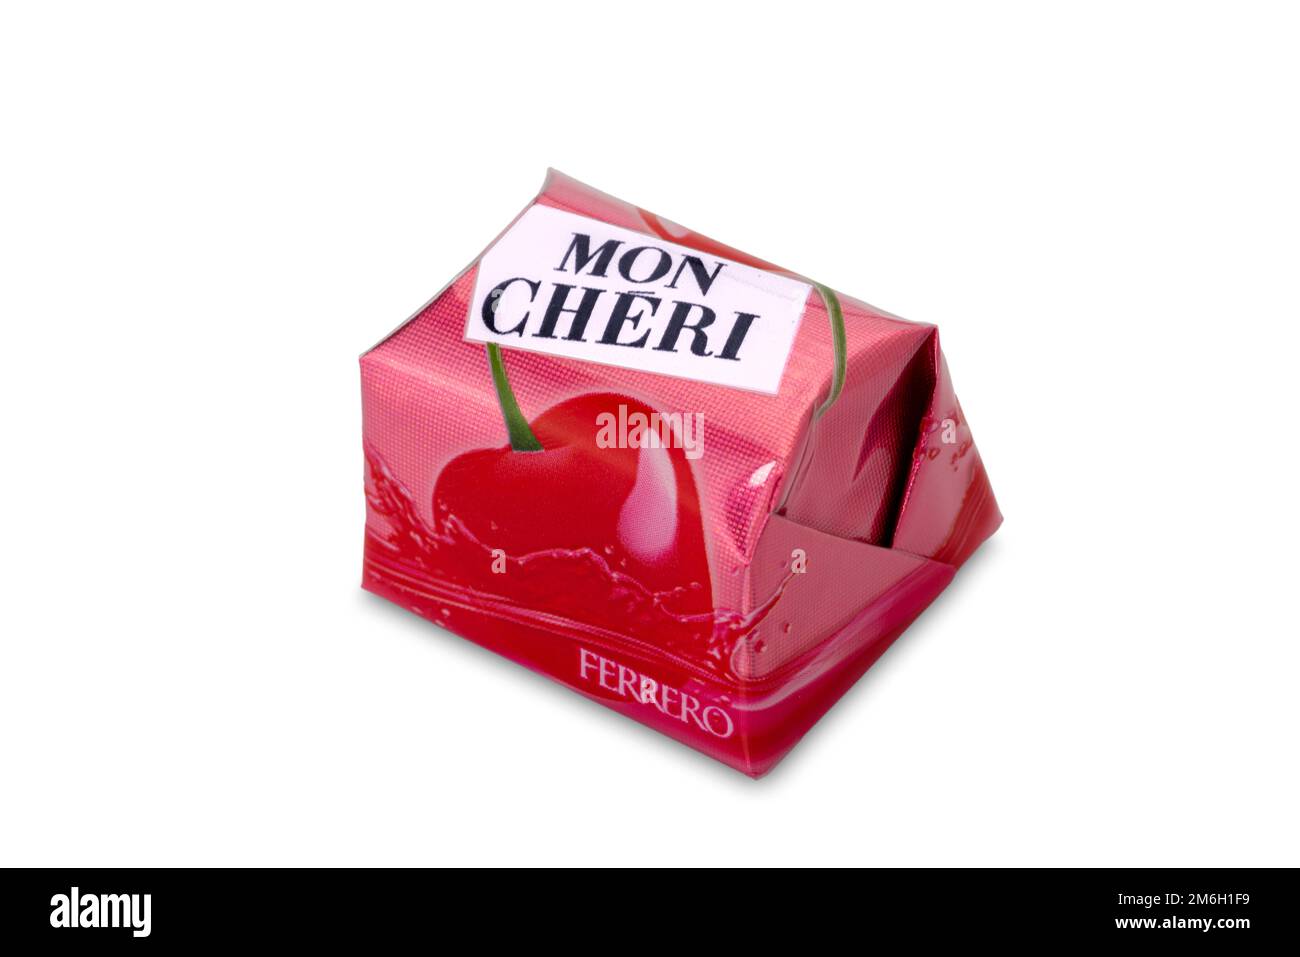 Mon Cheri Fine chocolate bonbons filled with cherry and liqueur